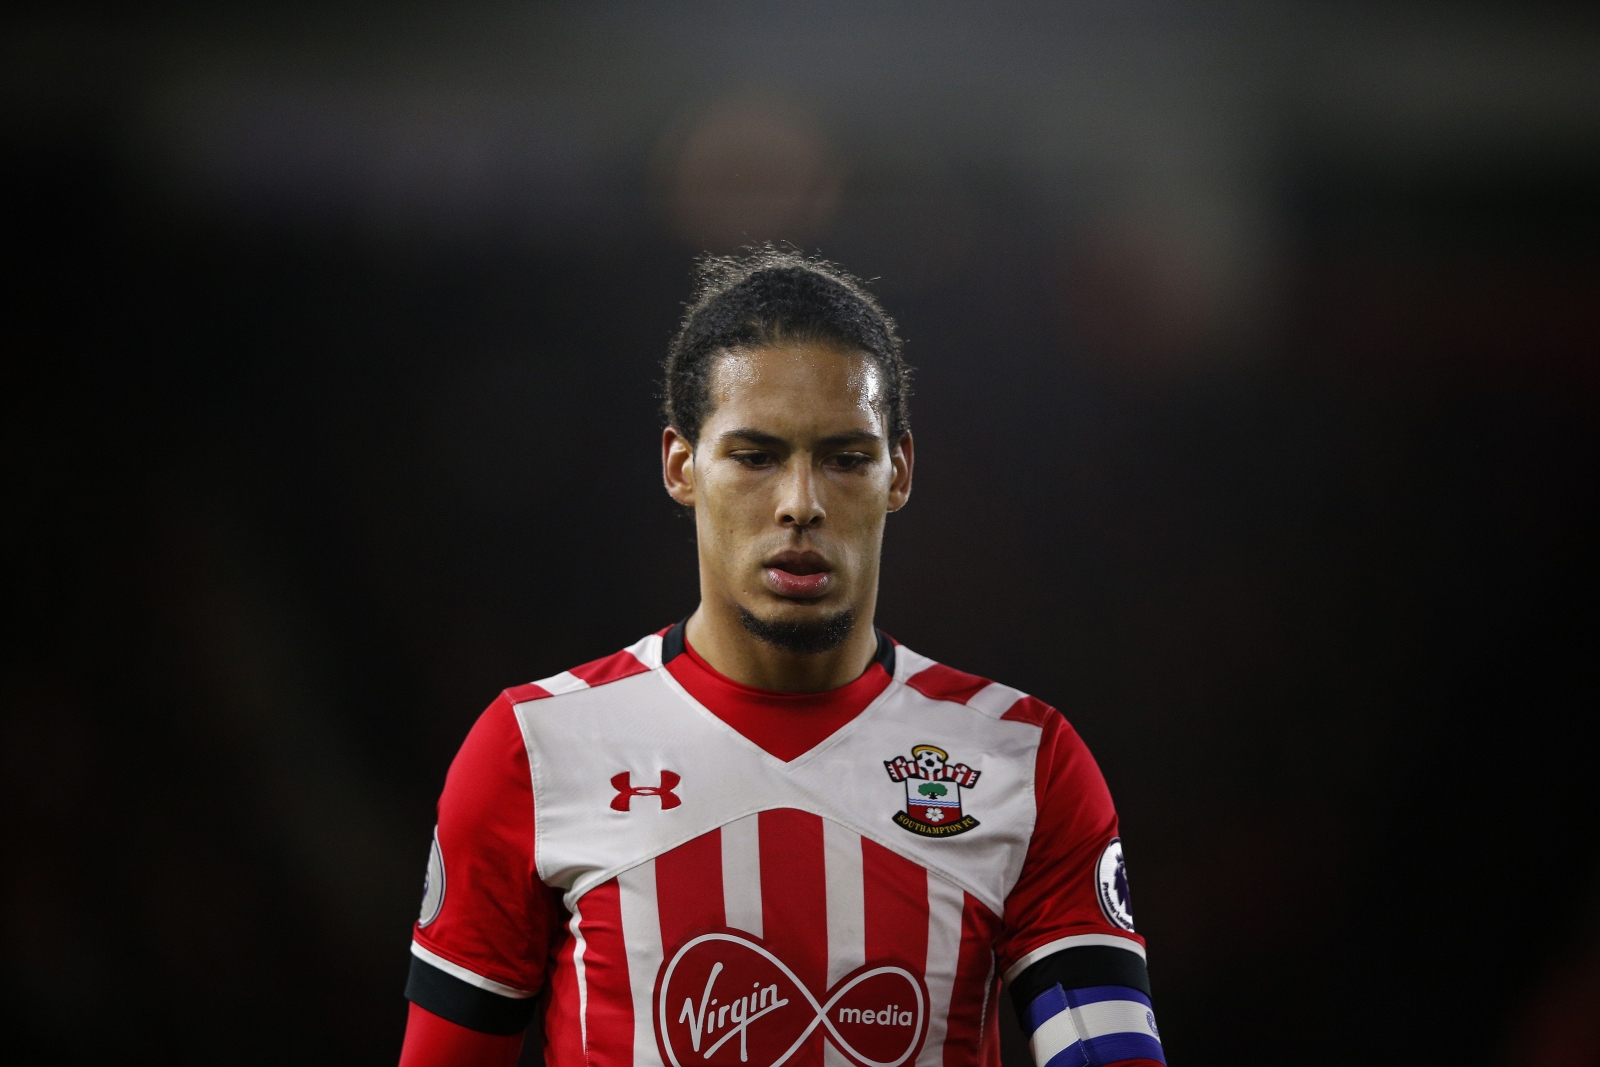 Liverpool working 'desperately' over next signings and could return for van Dijk ... - International Business Times UK